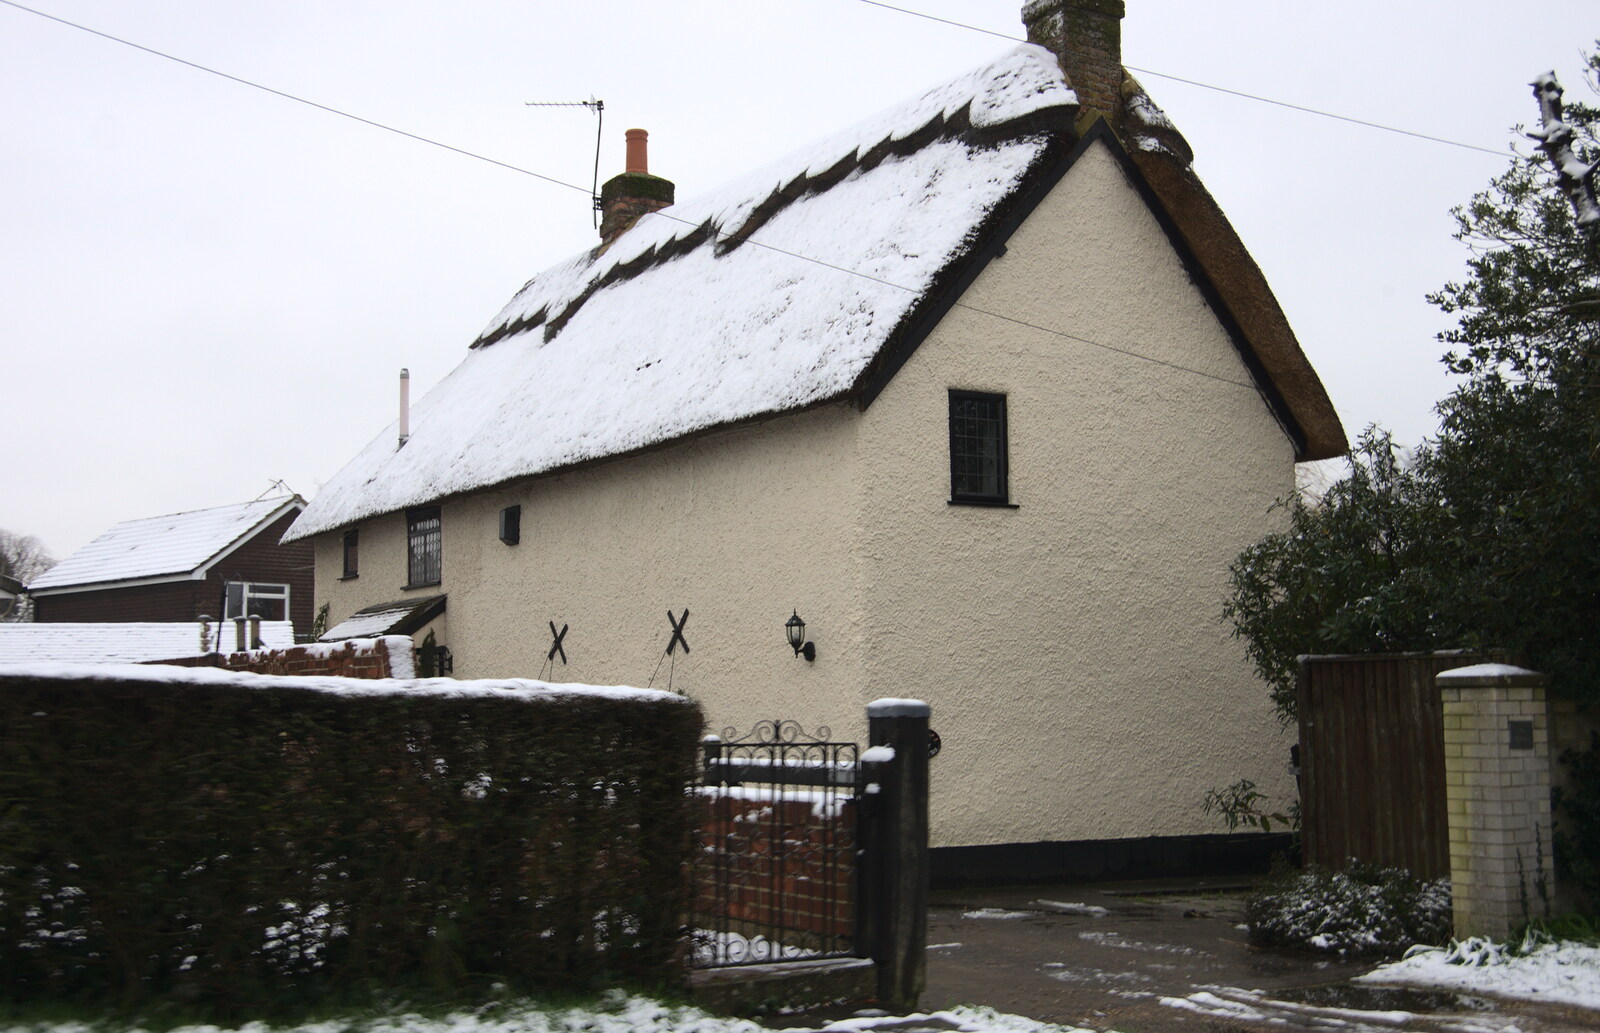 Mother's old pad - The Willows - in Bransgore from A Wintry Trip Down South, Walkford, Dorset - 1st February 2019